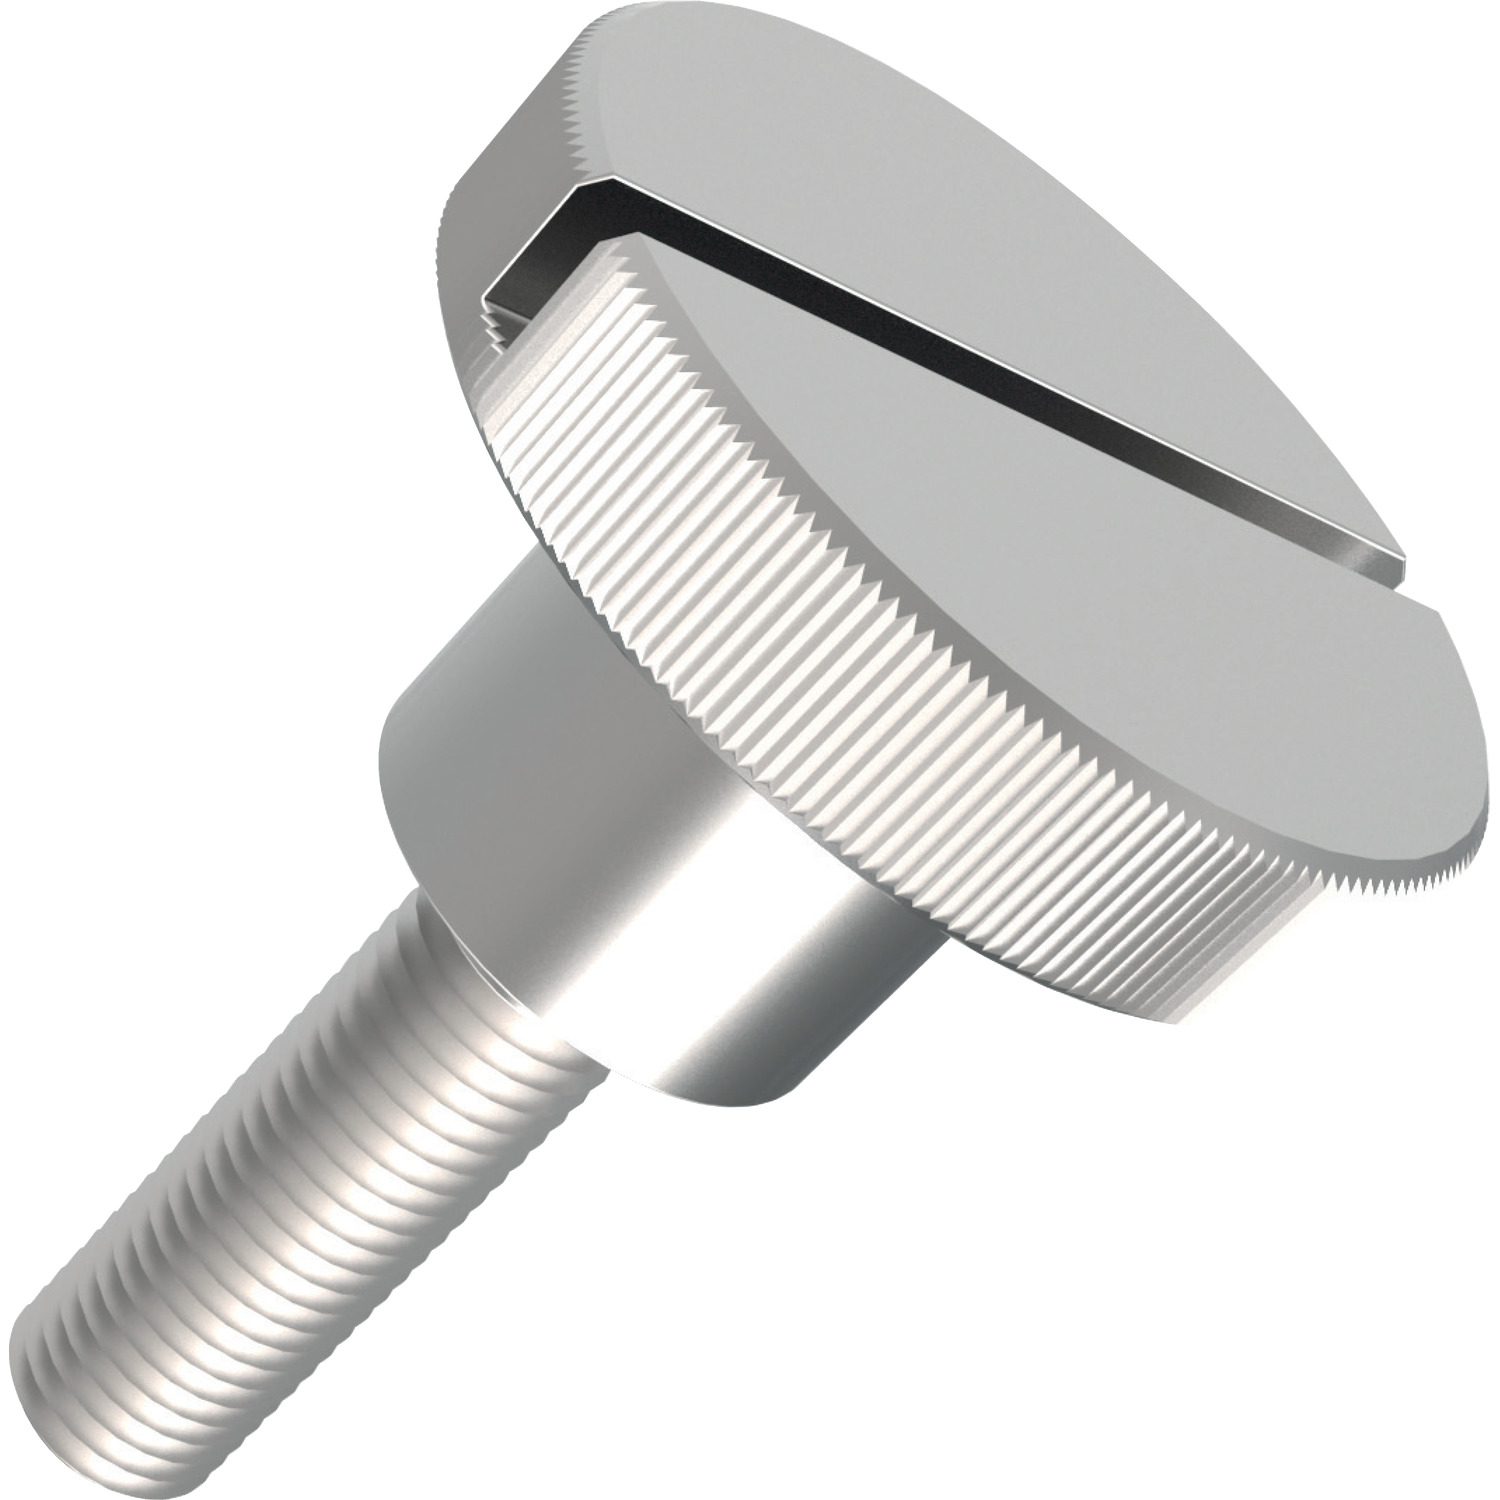 P0404.050-008-A2 Knurled Thumb Screws Slotted M5x08 A2s/s 